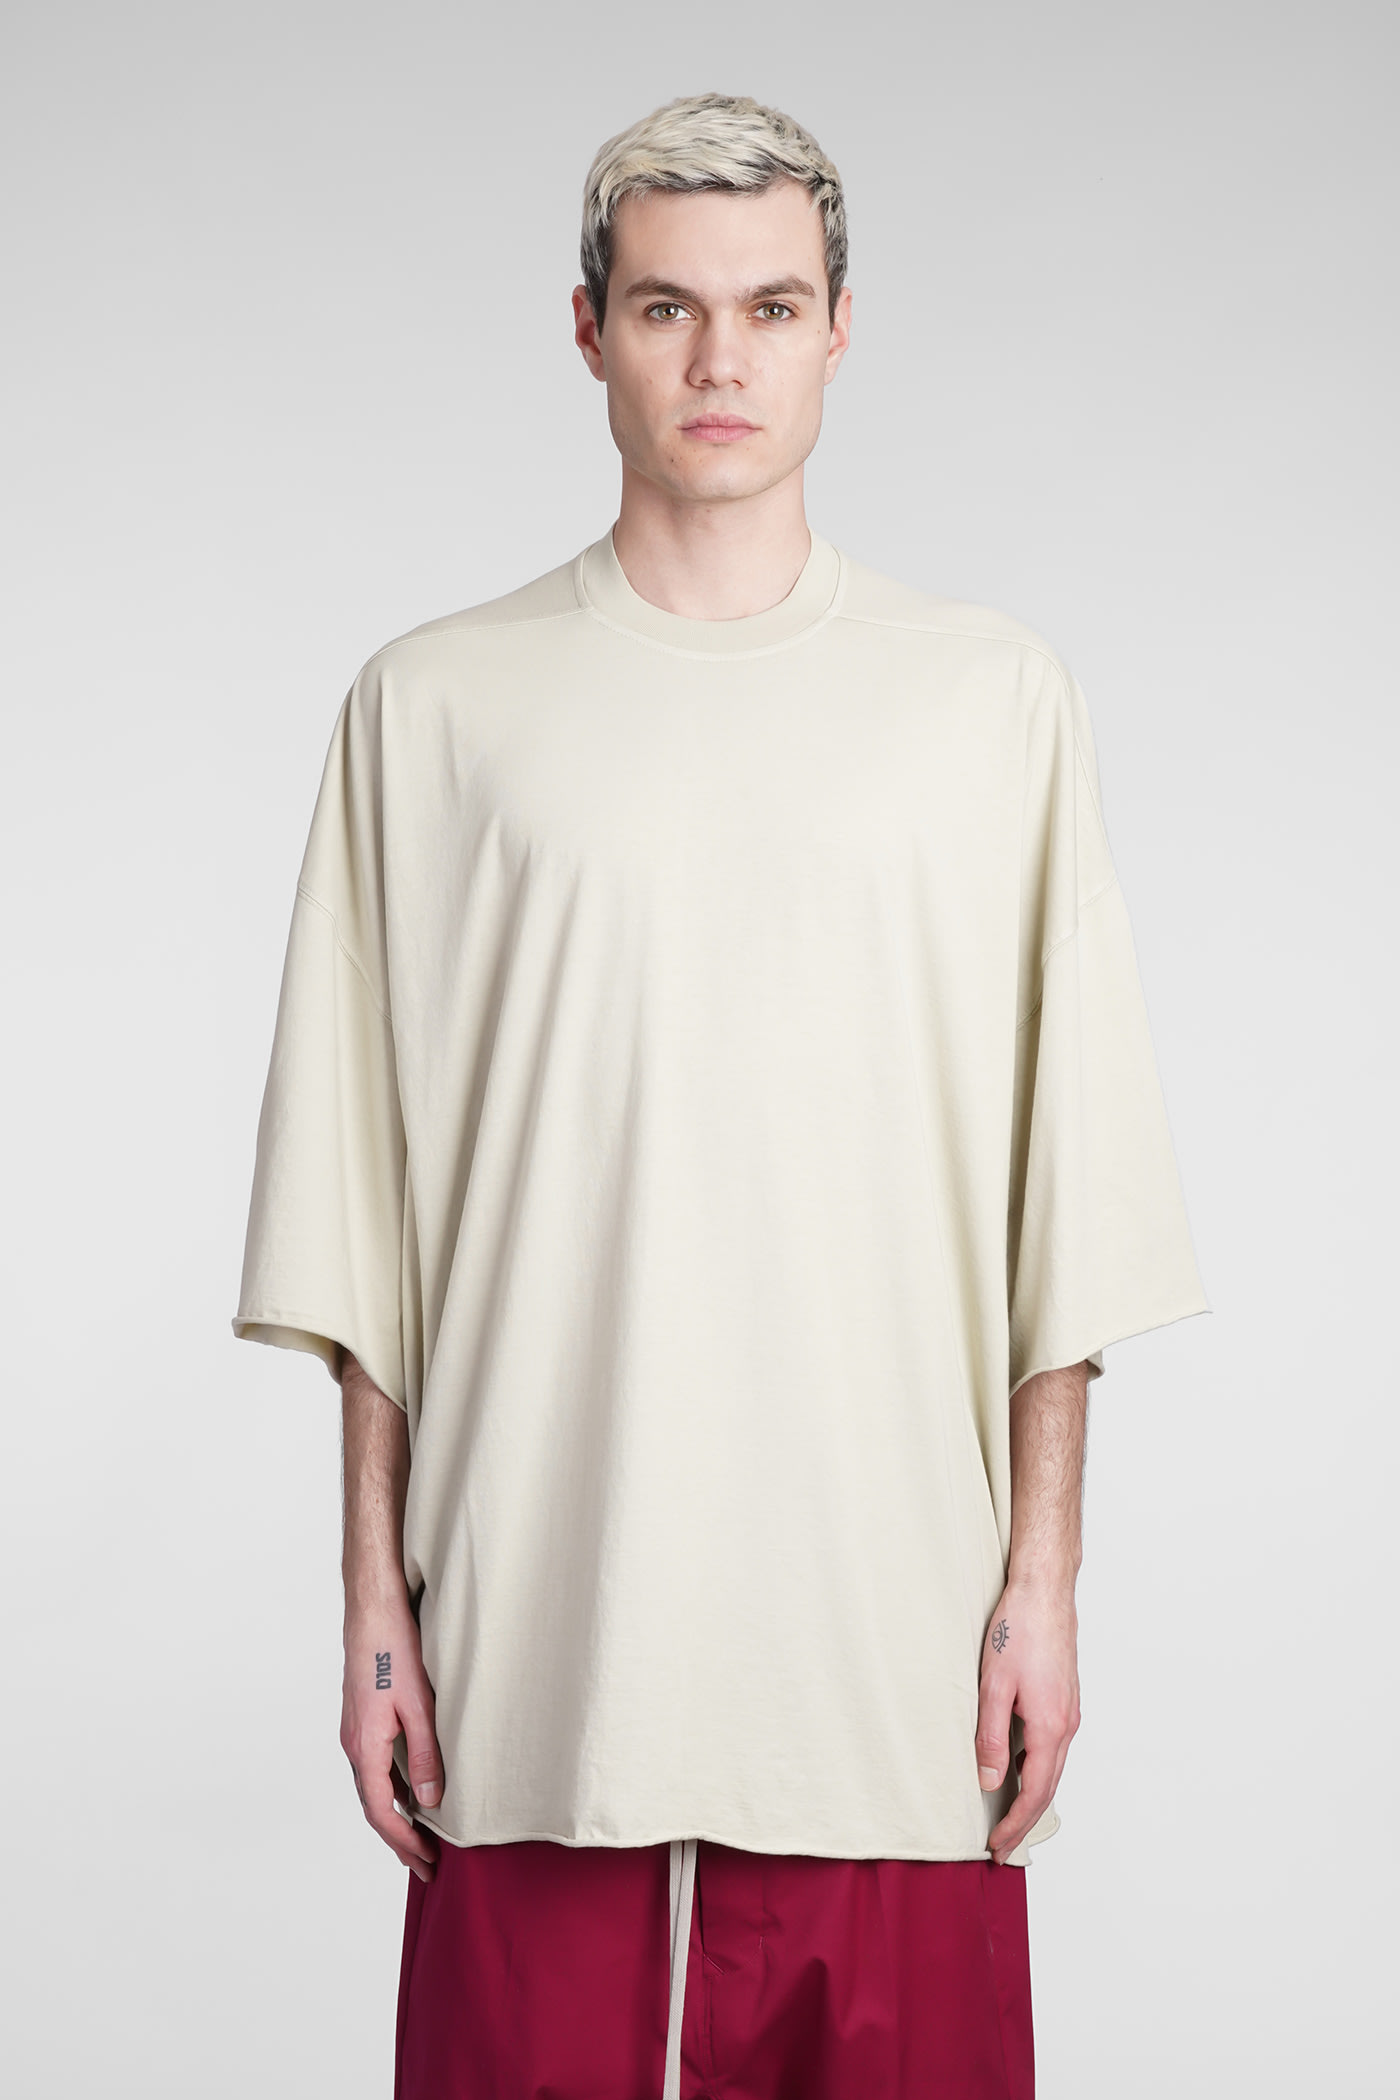 RICK OWENS TOMMY T T-SHIRT IN BEIGE COTTON